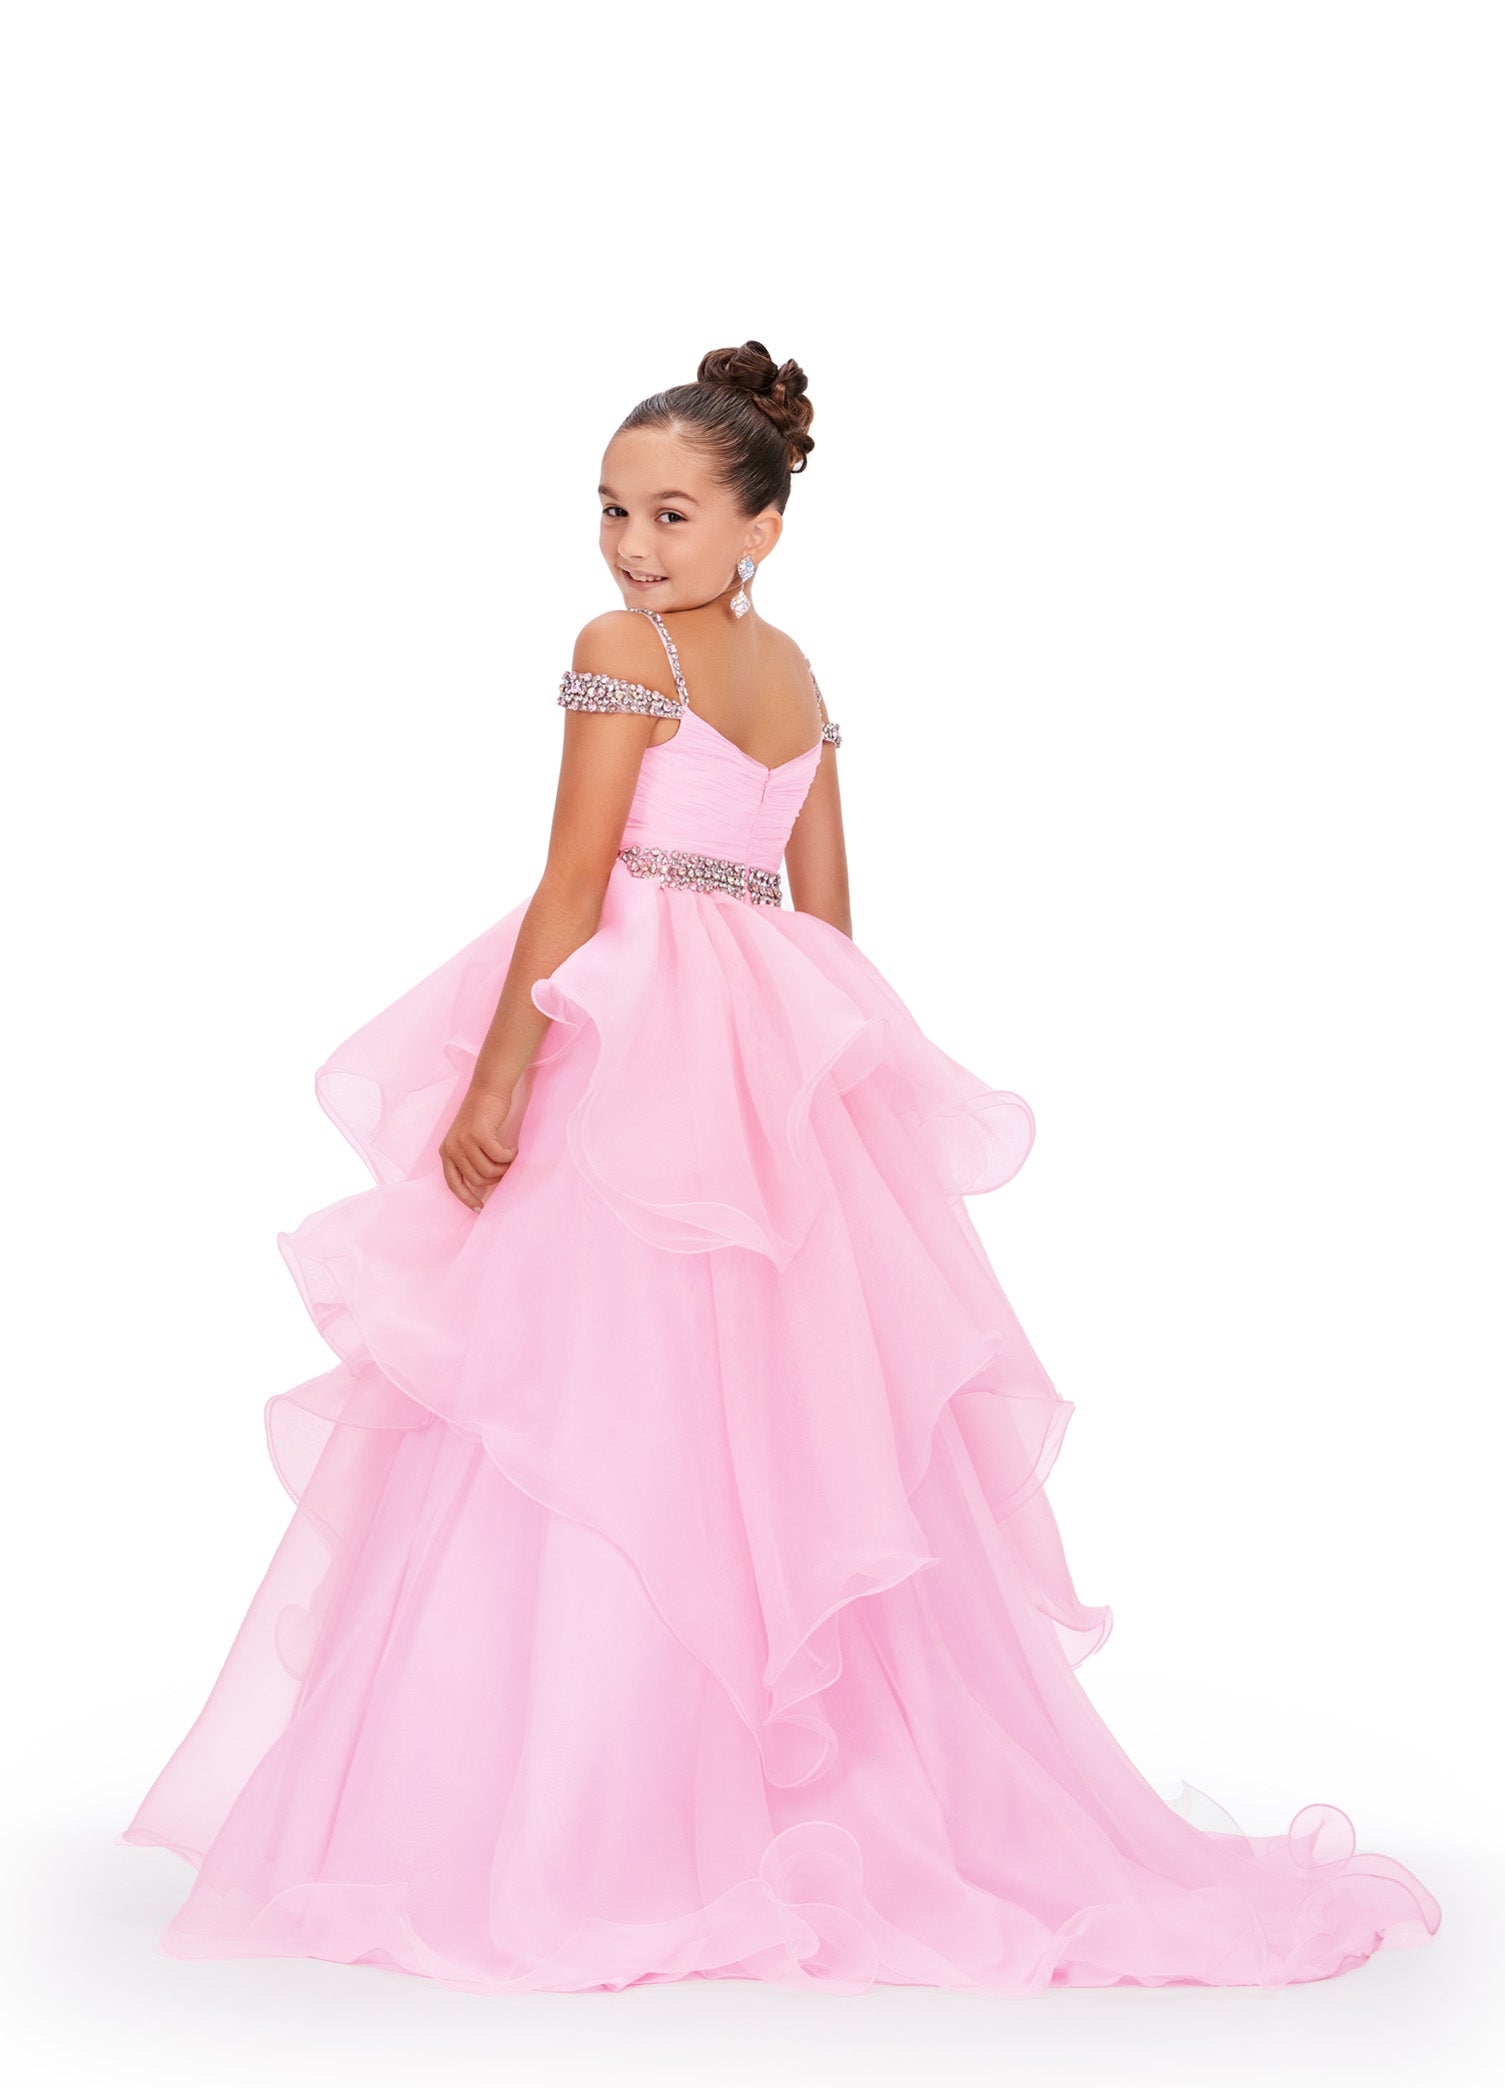 Glam up your little one's pageant look with the Ashley Lauren Kids 8250 A Line Ruffle Dress. This stunning ballgown features a delicate off-the-shoulder neckline, adorned with intricate beading. The ruffled A-line skirt adds a touch of elegance, making your child shine on stage. Perfect for any formal occasion. 